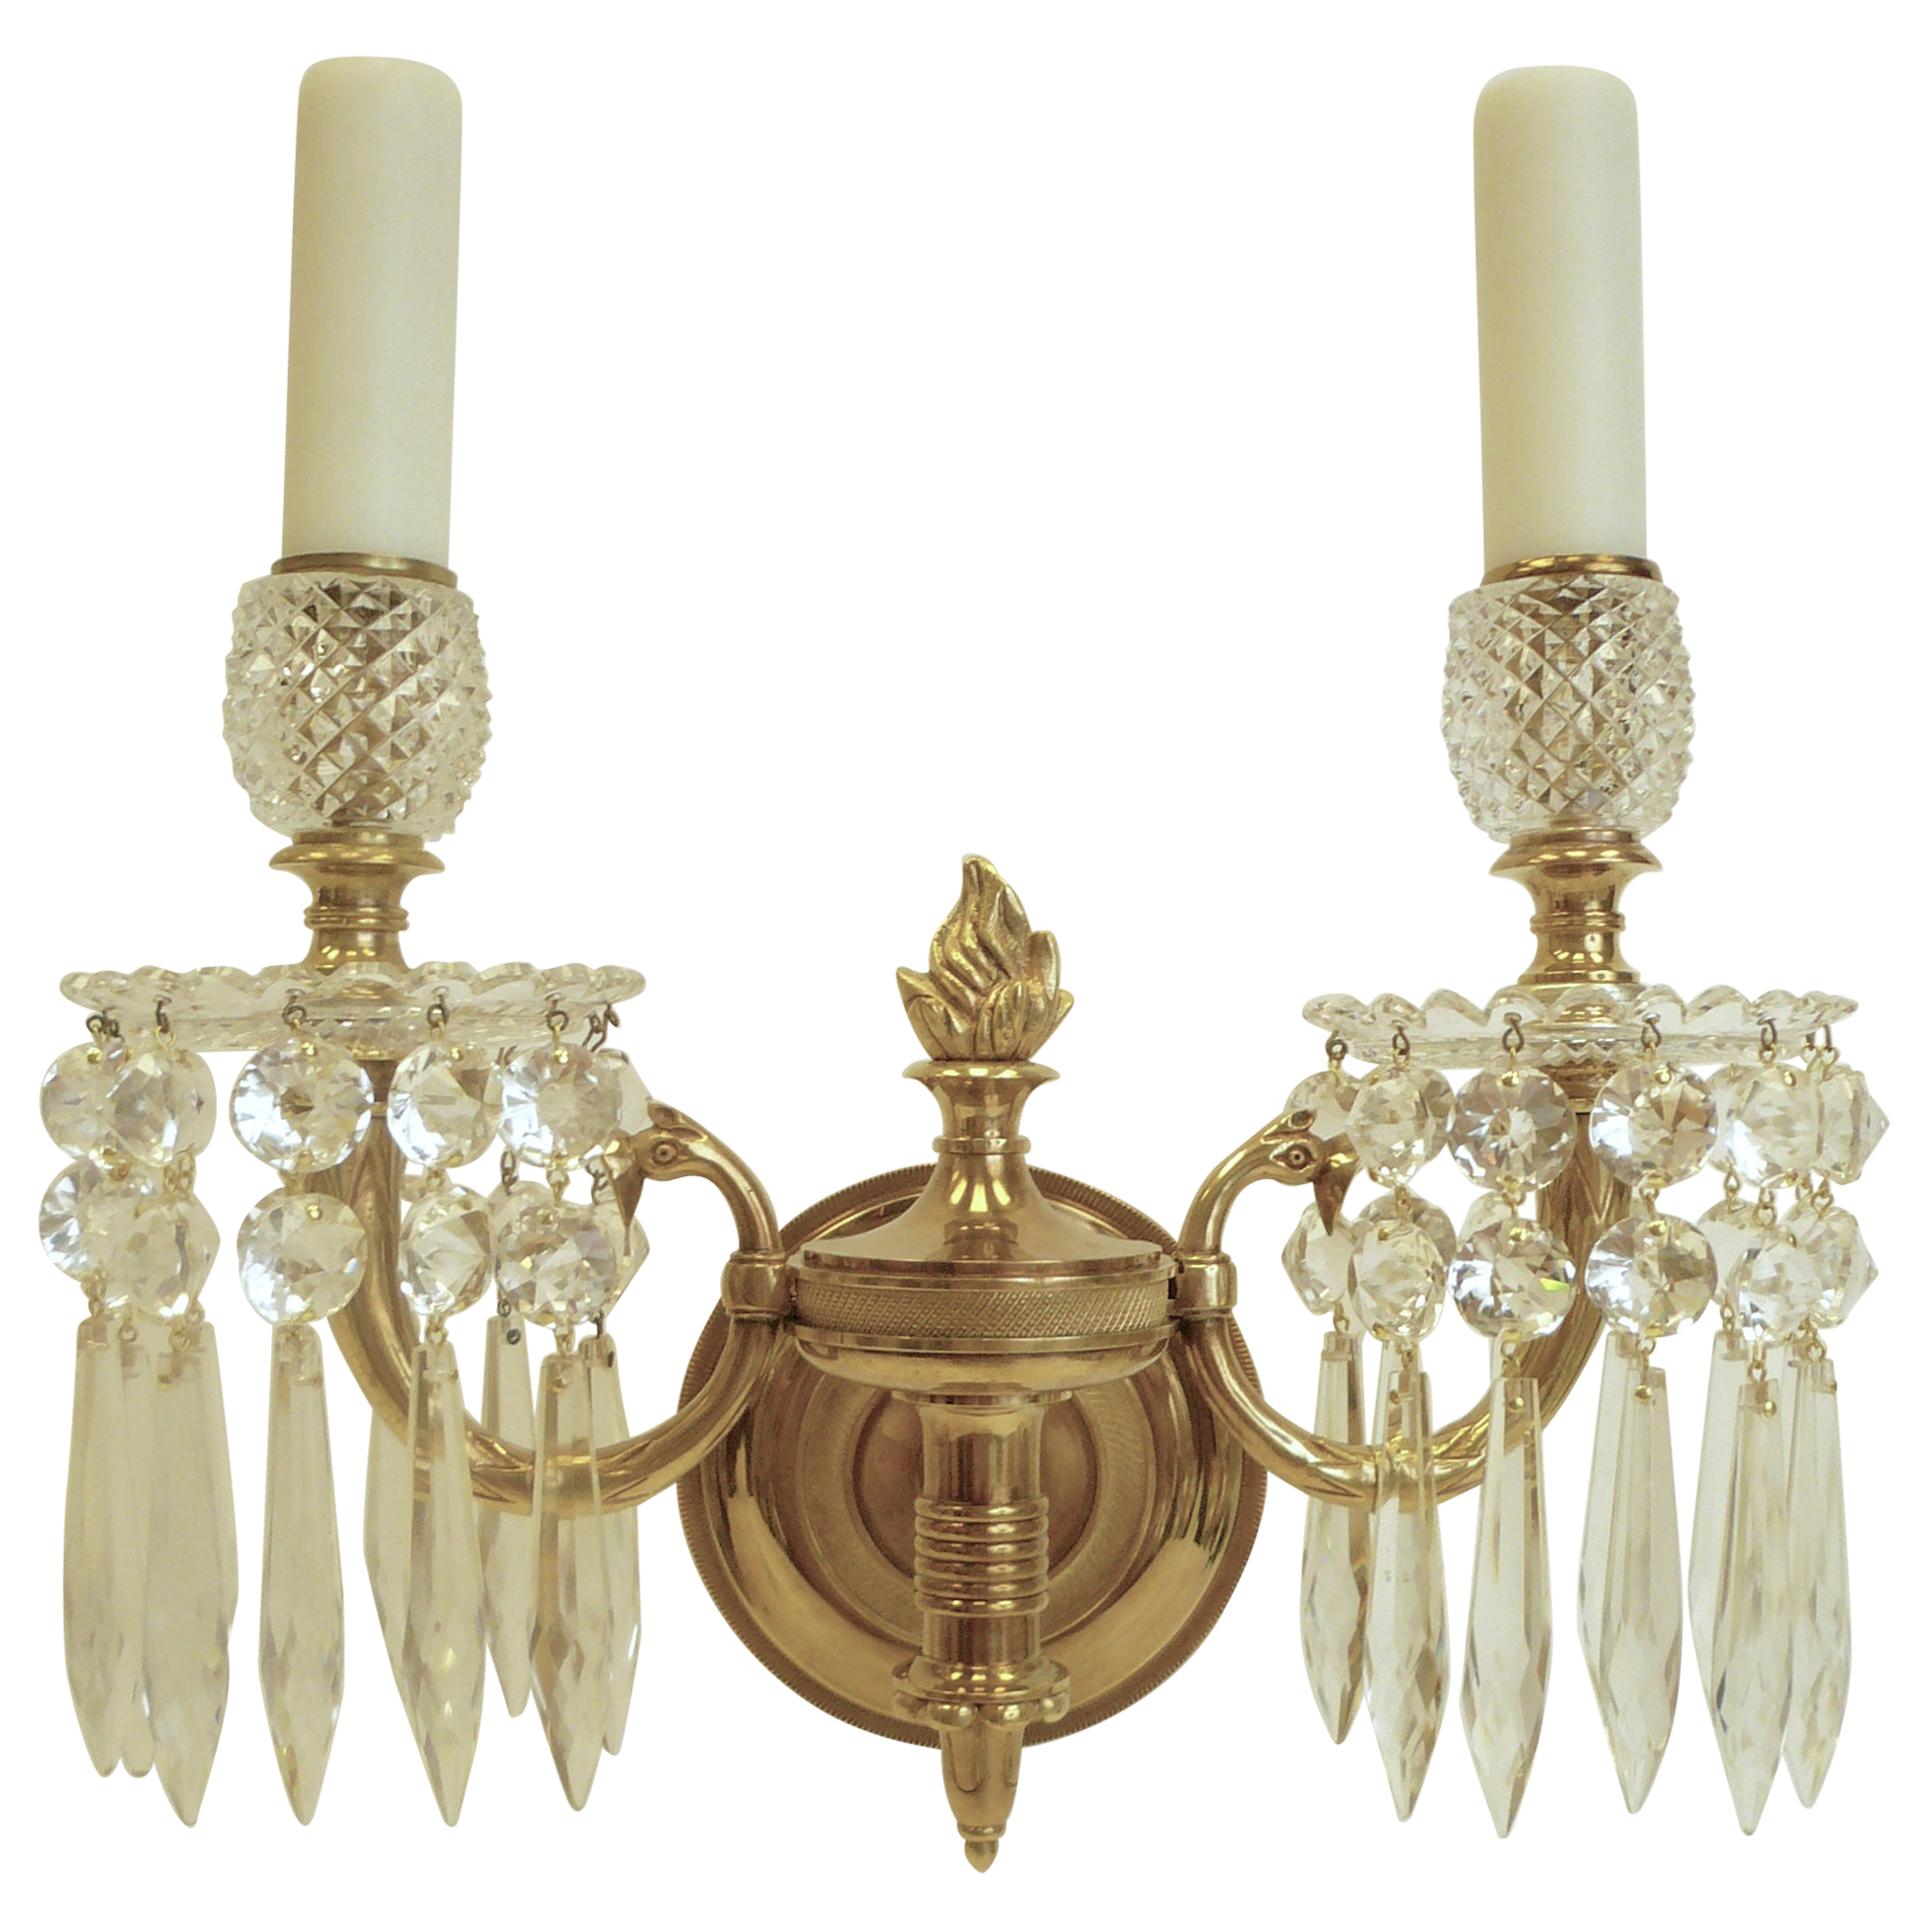 Set of Four Regency Style Bronze and Crystal Sconces by Perry & Co.